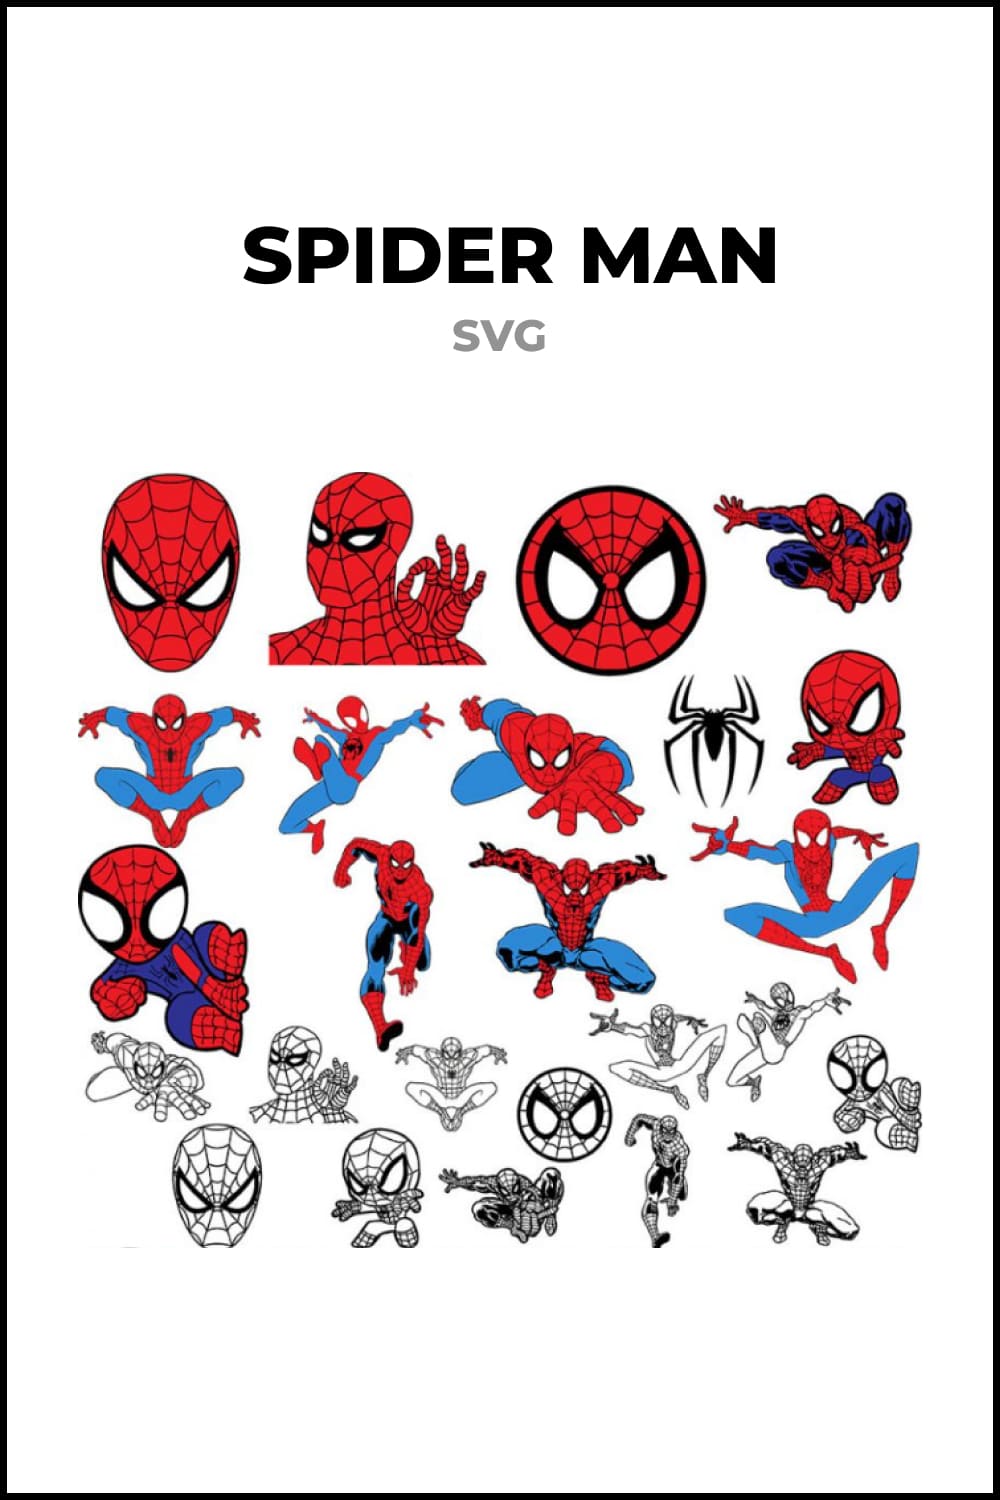 Collage from the images of Spiderman in motion, in different drawing styles.